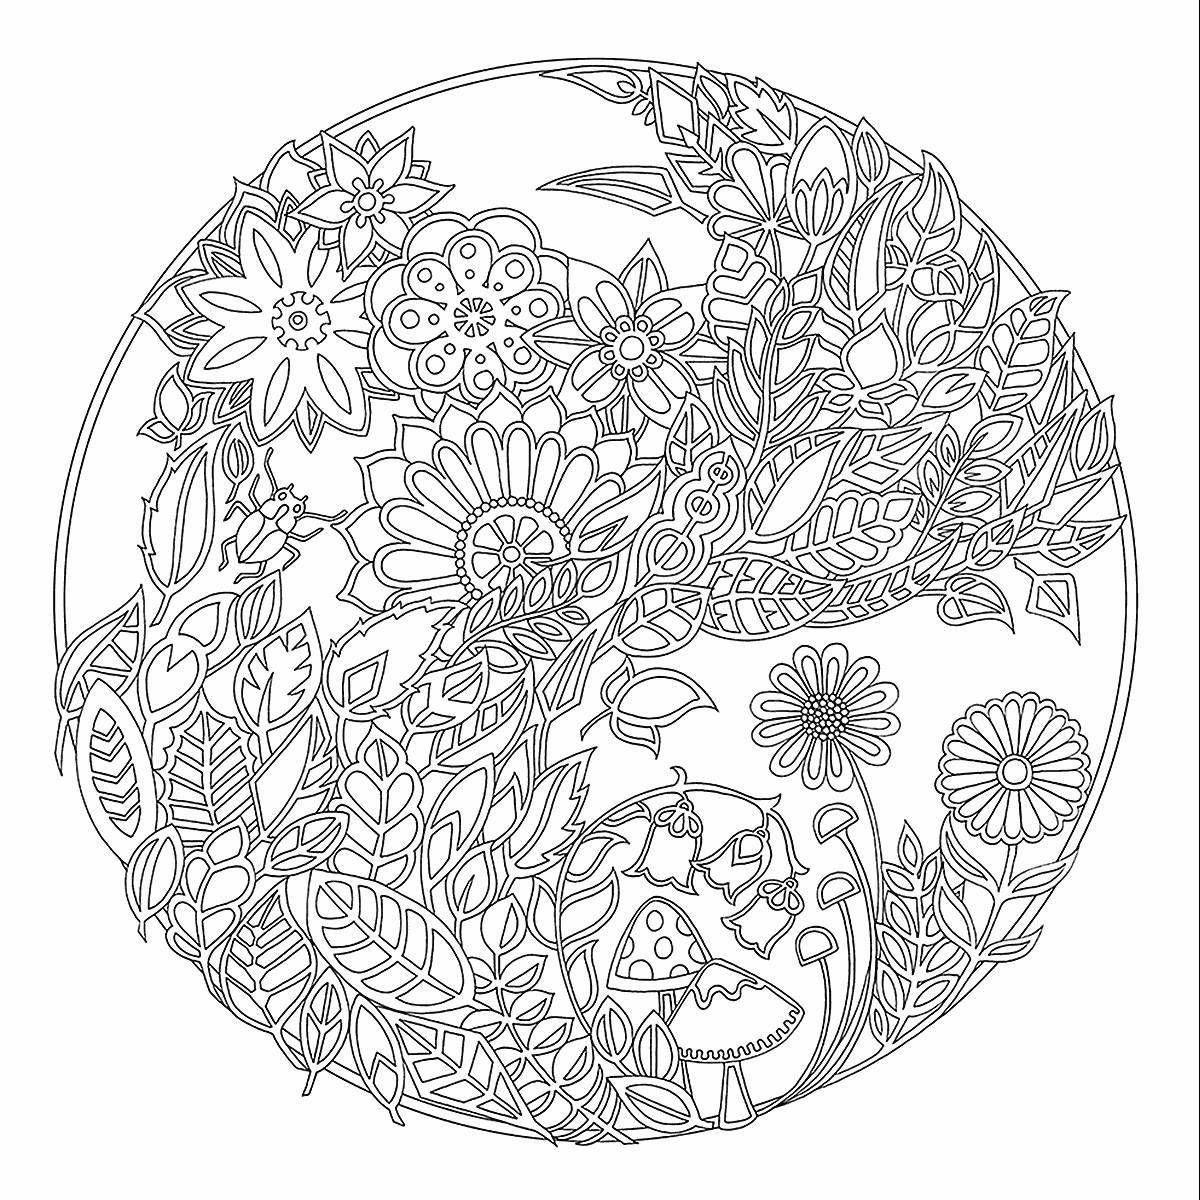 Blissful Antistress Art Therapy Coloring Page